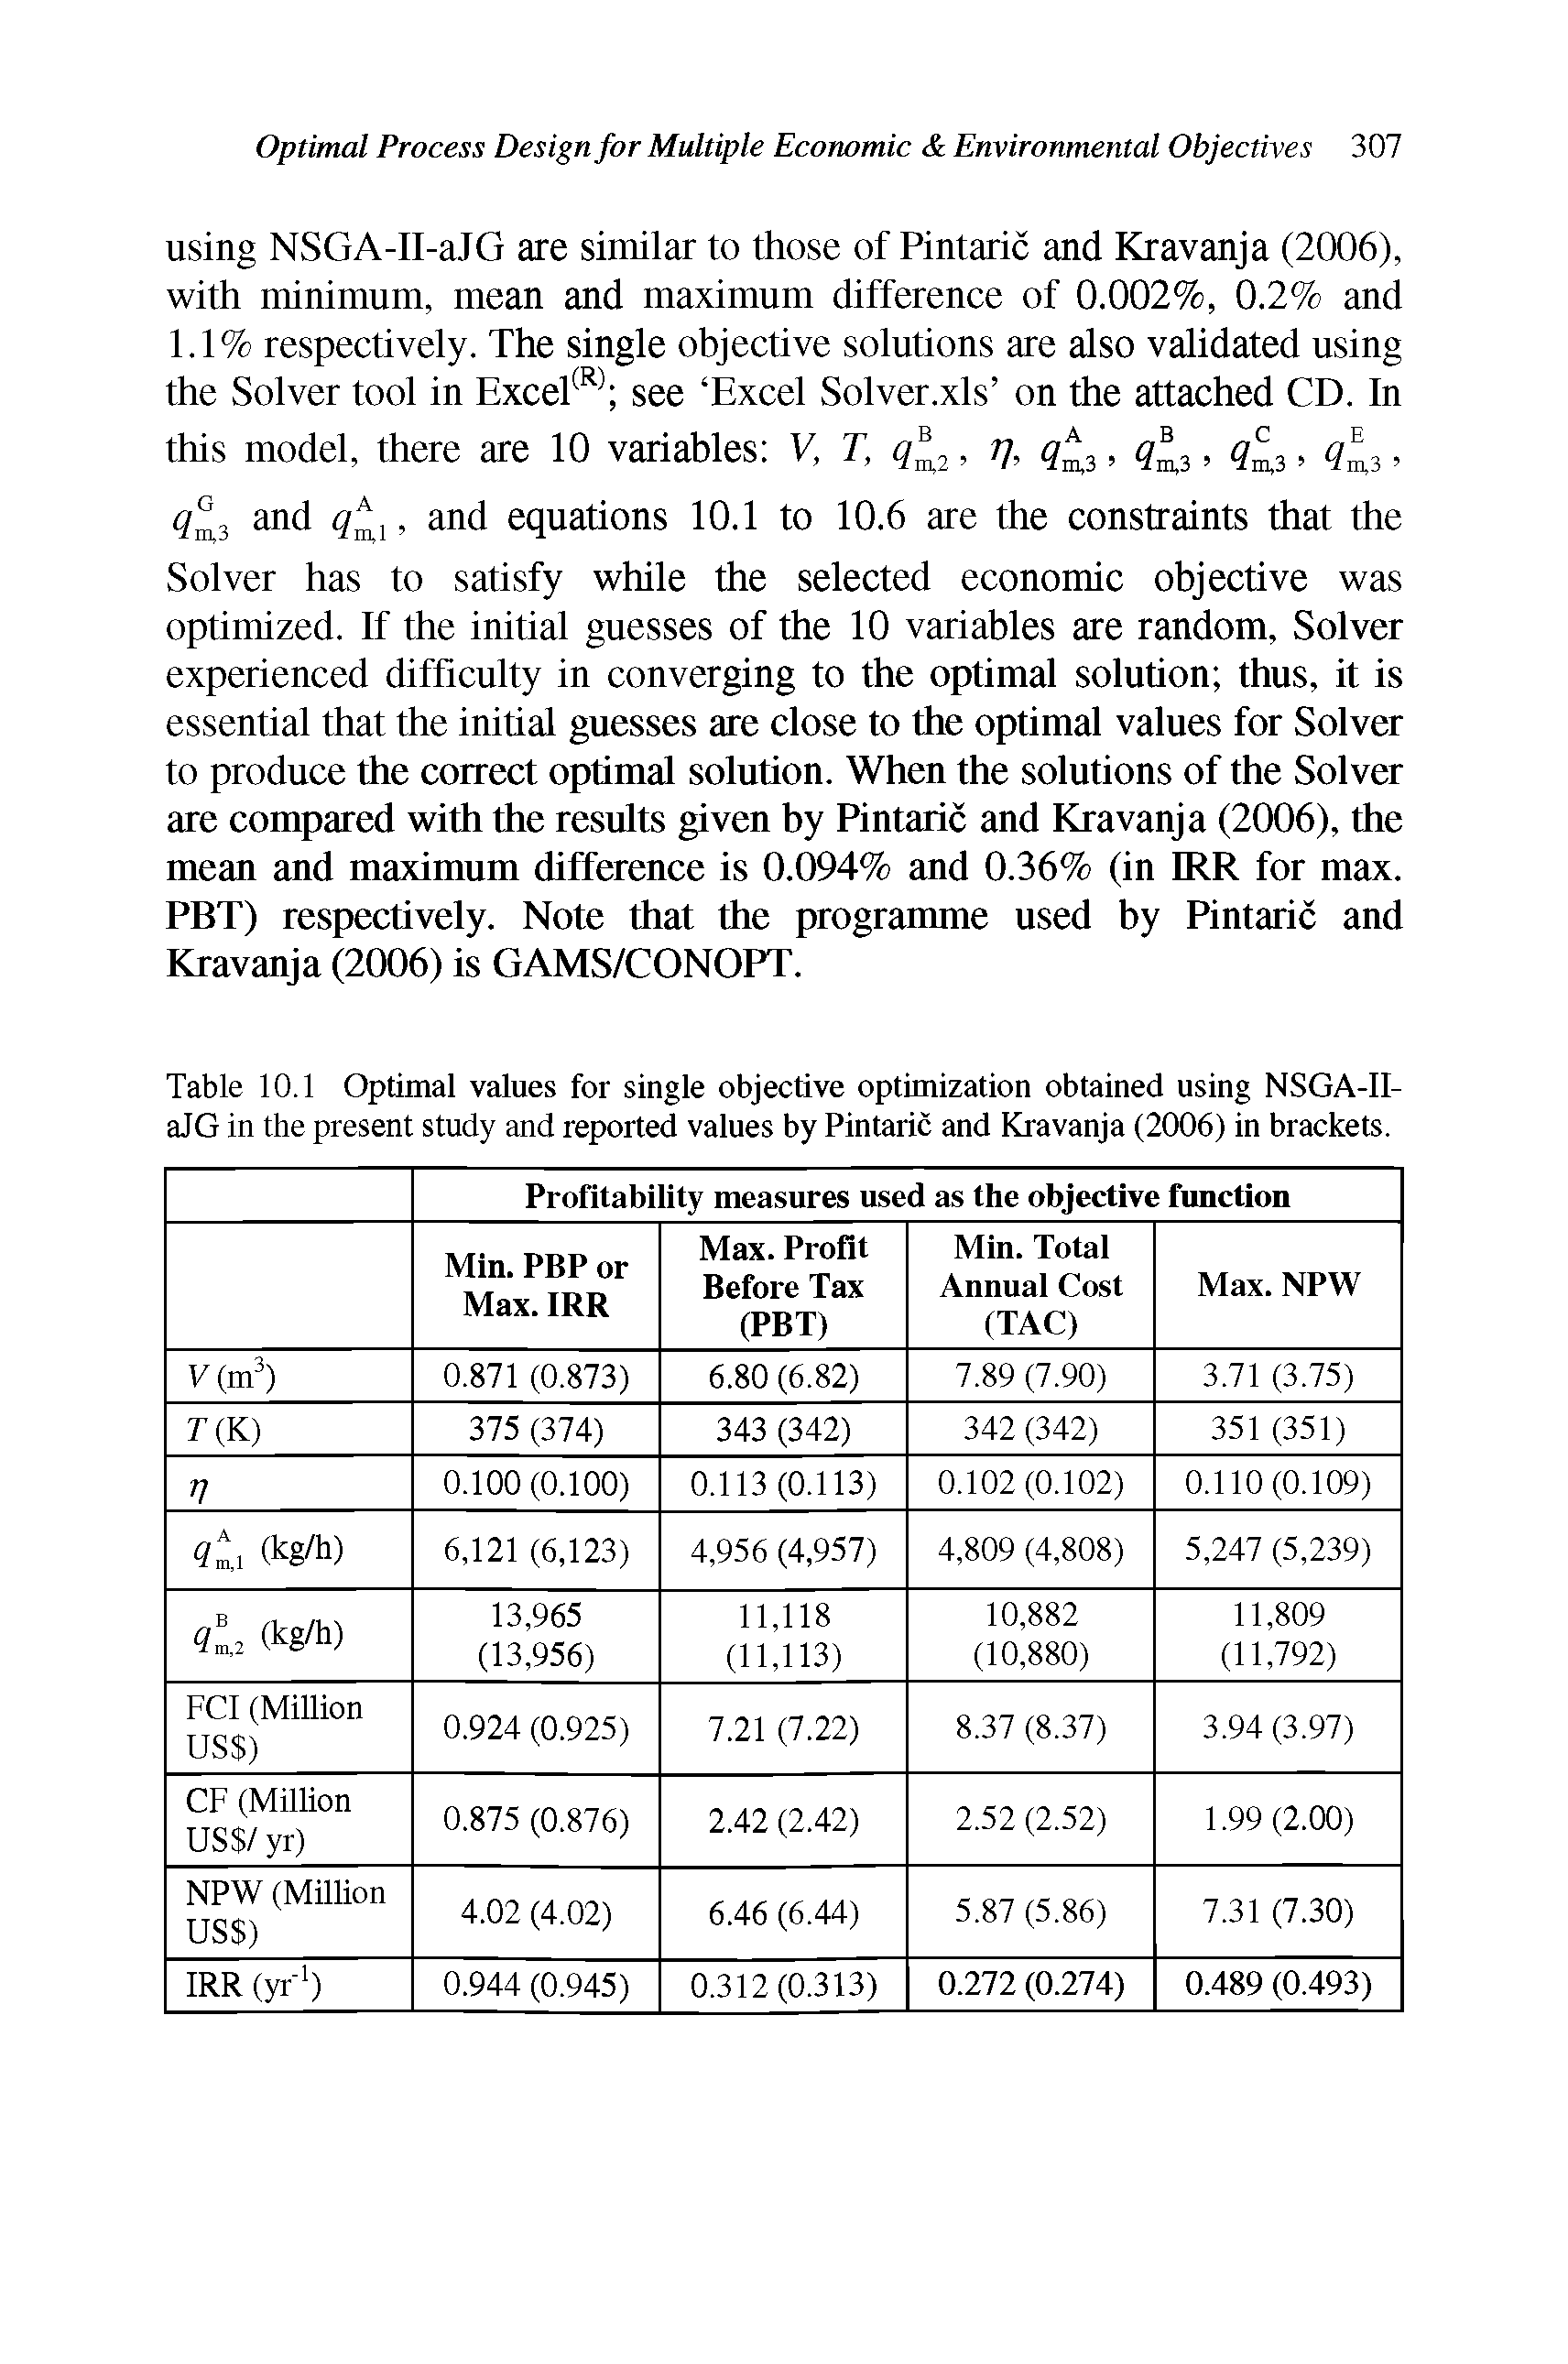 Table 10.1 Optimal values for single objective optimization obtained using NSGA-II-aJG in the present study and reported values by Pintaric and Kravanja (2006) in brackets.